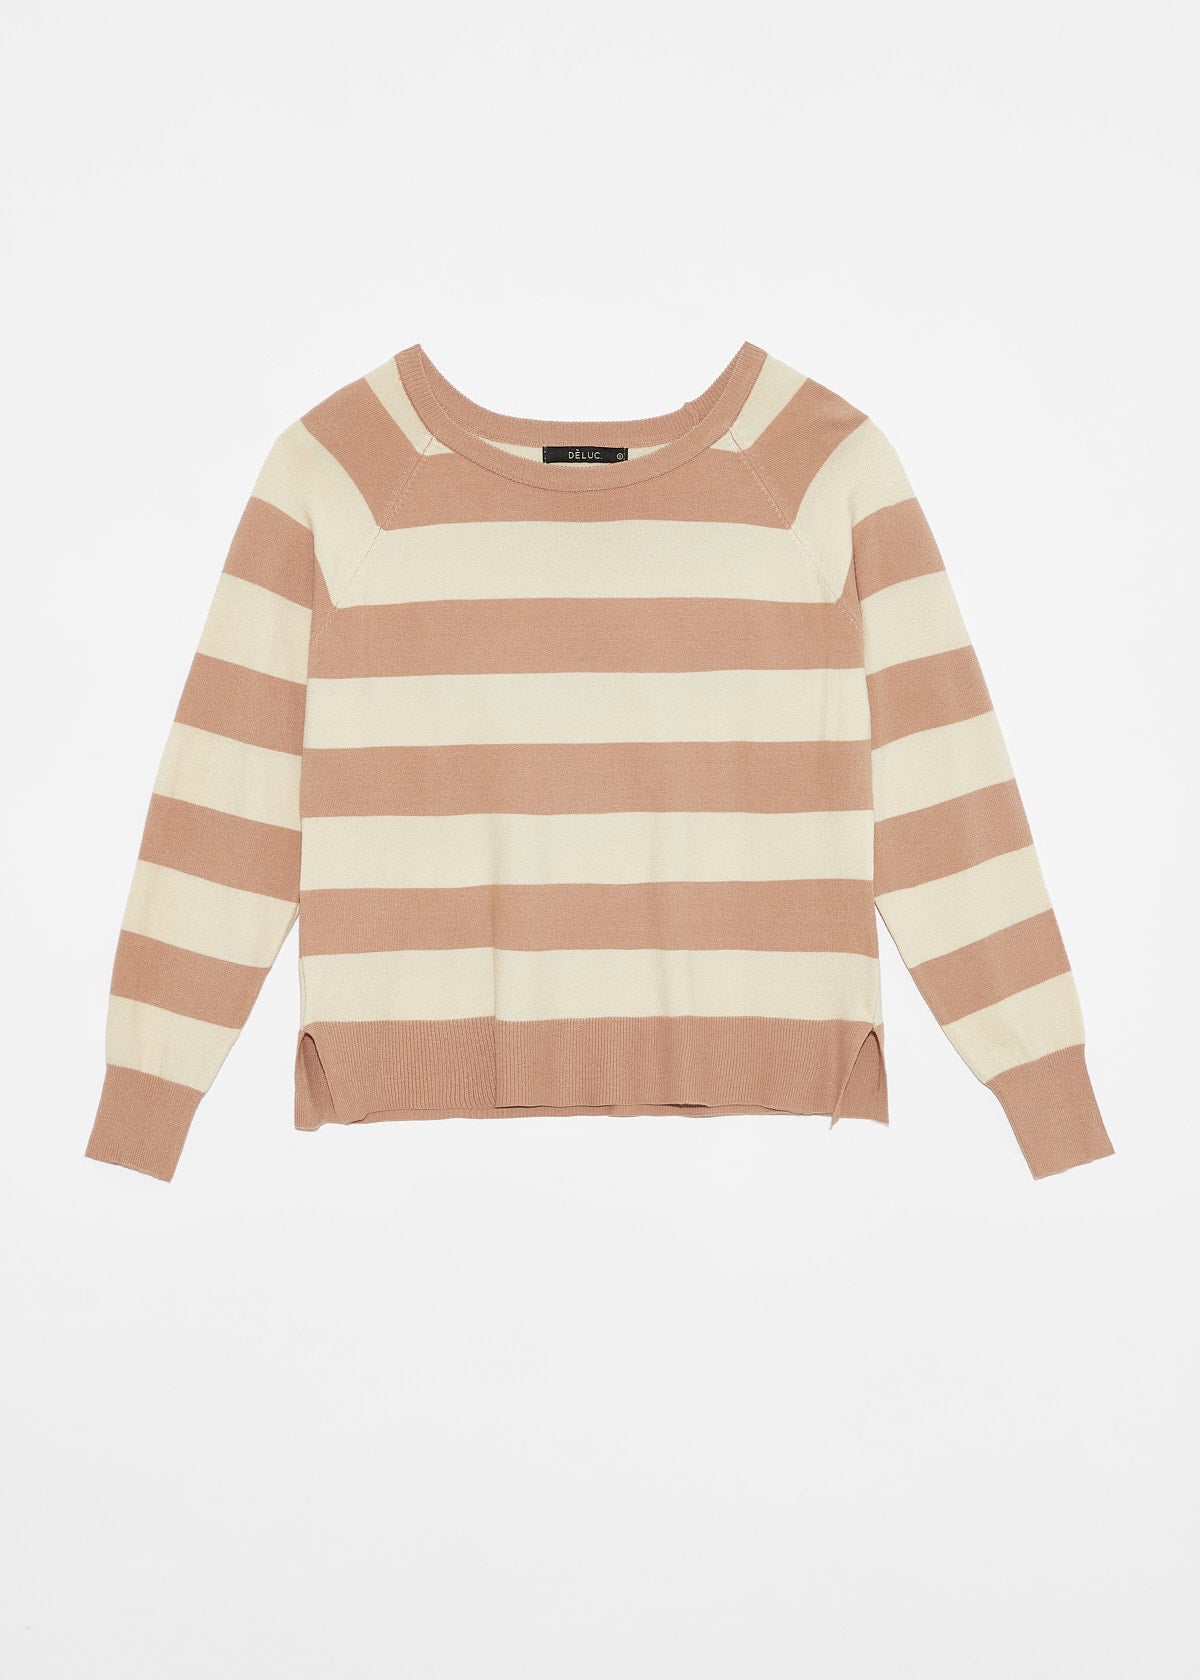 HOLBEIN SWEATER